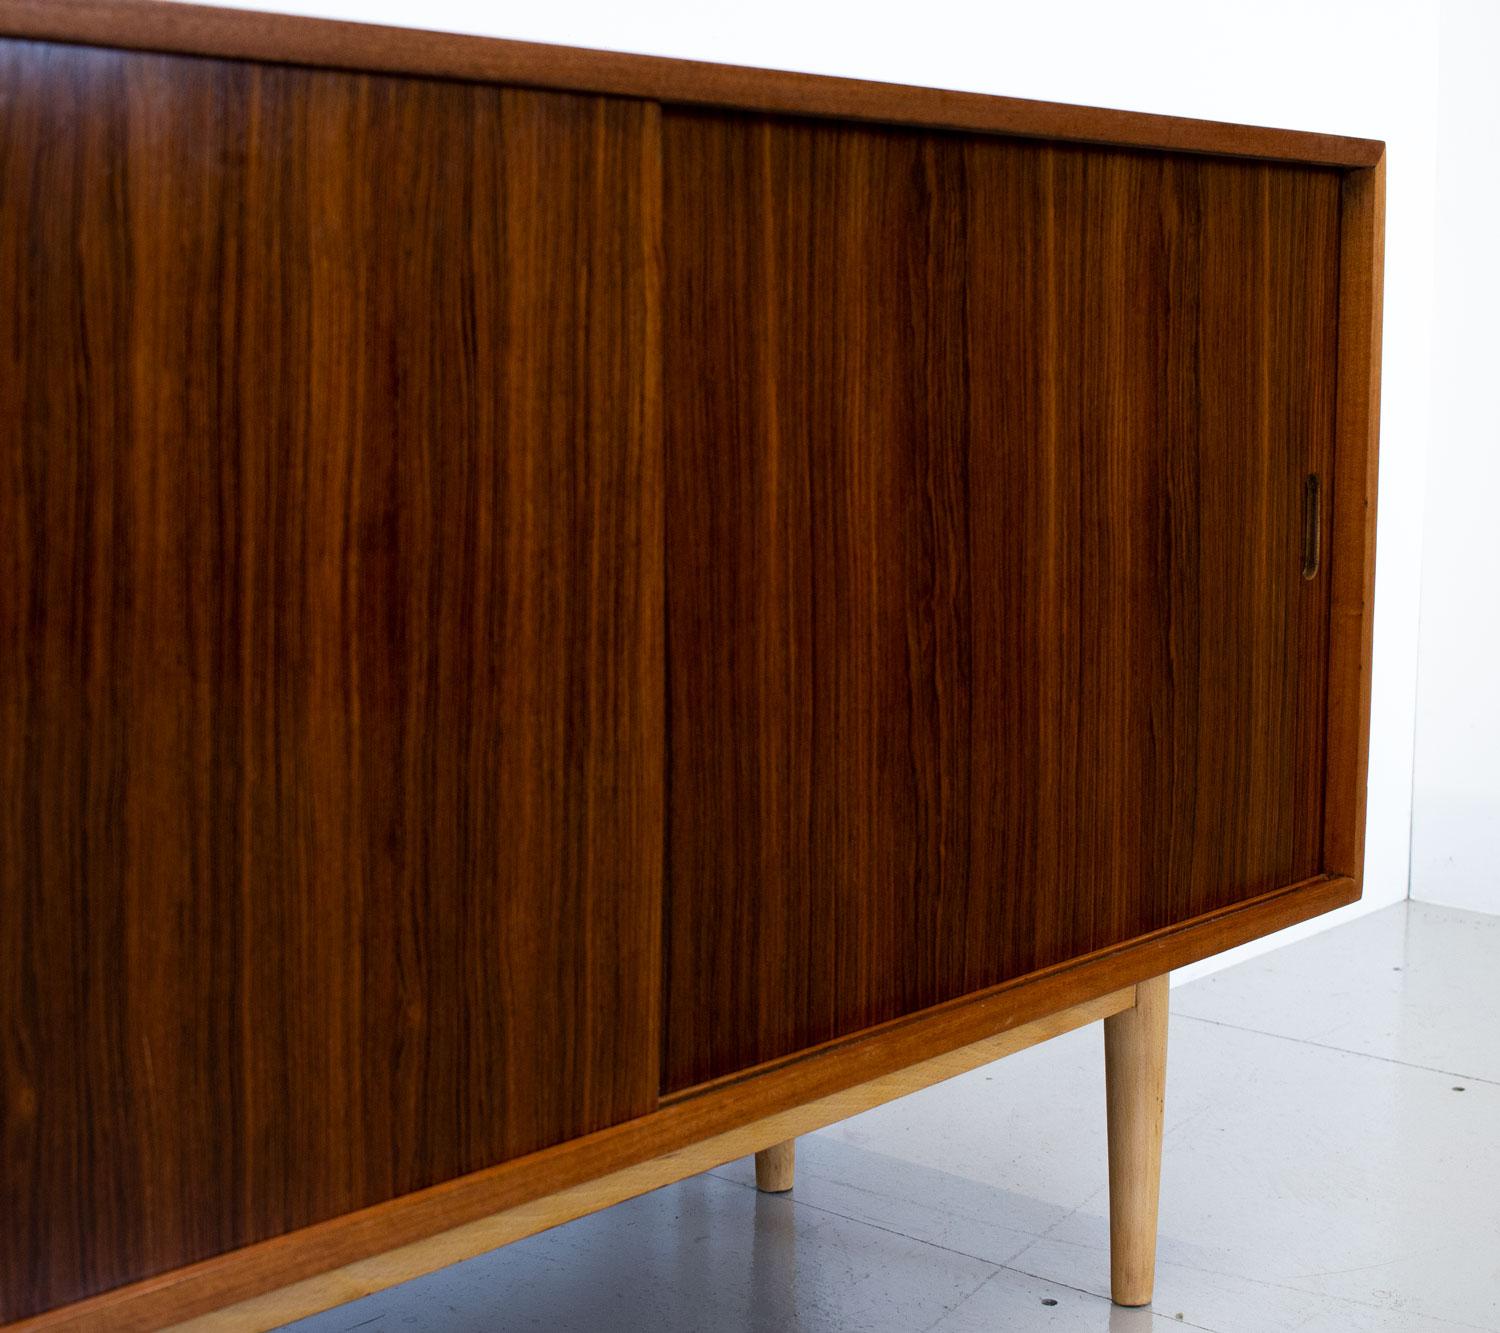 British Interplan Unit 'K' Rosewood Sideboard by Robin Day for Hille, 1950s